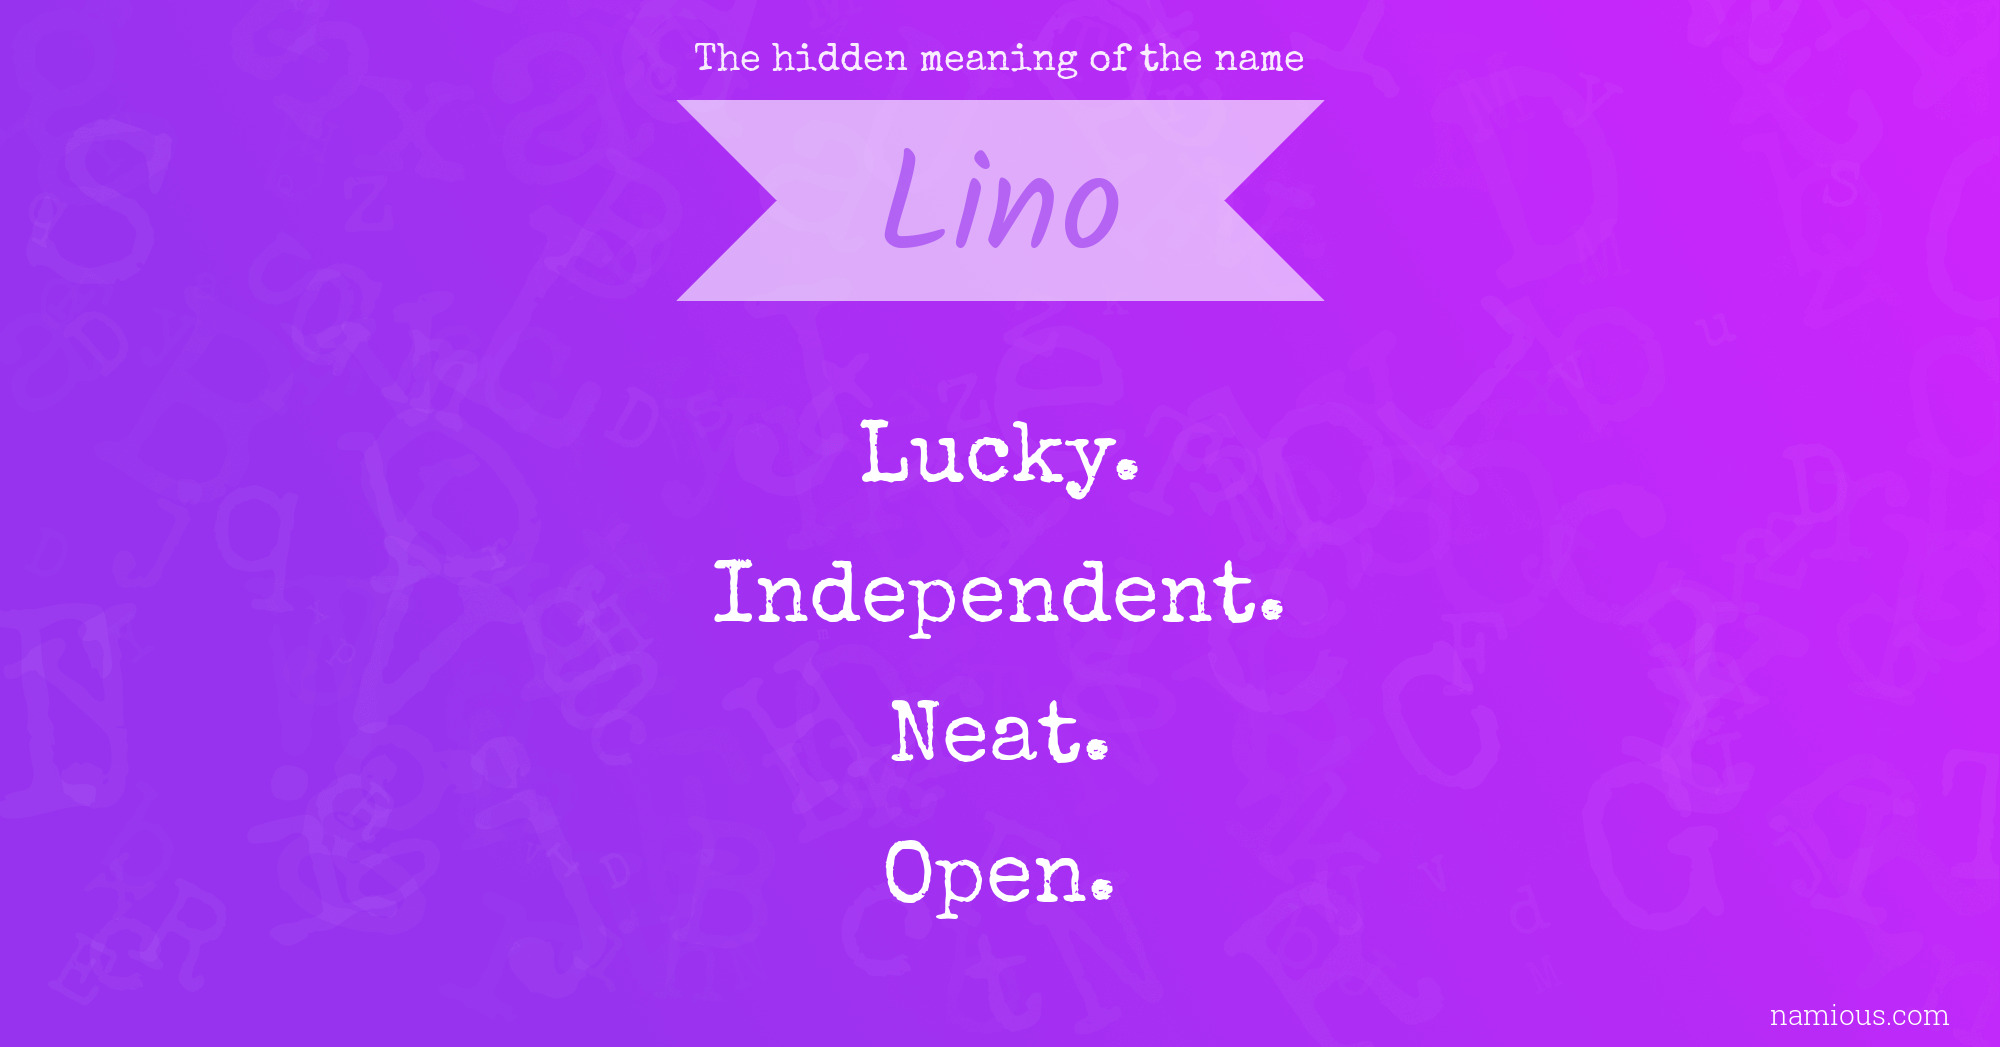 The hidden meaning of the name Lino